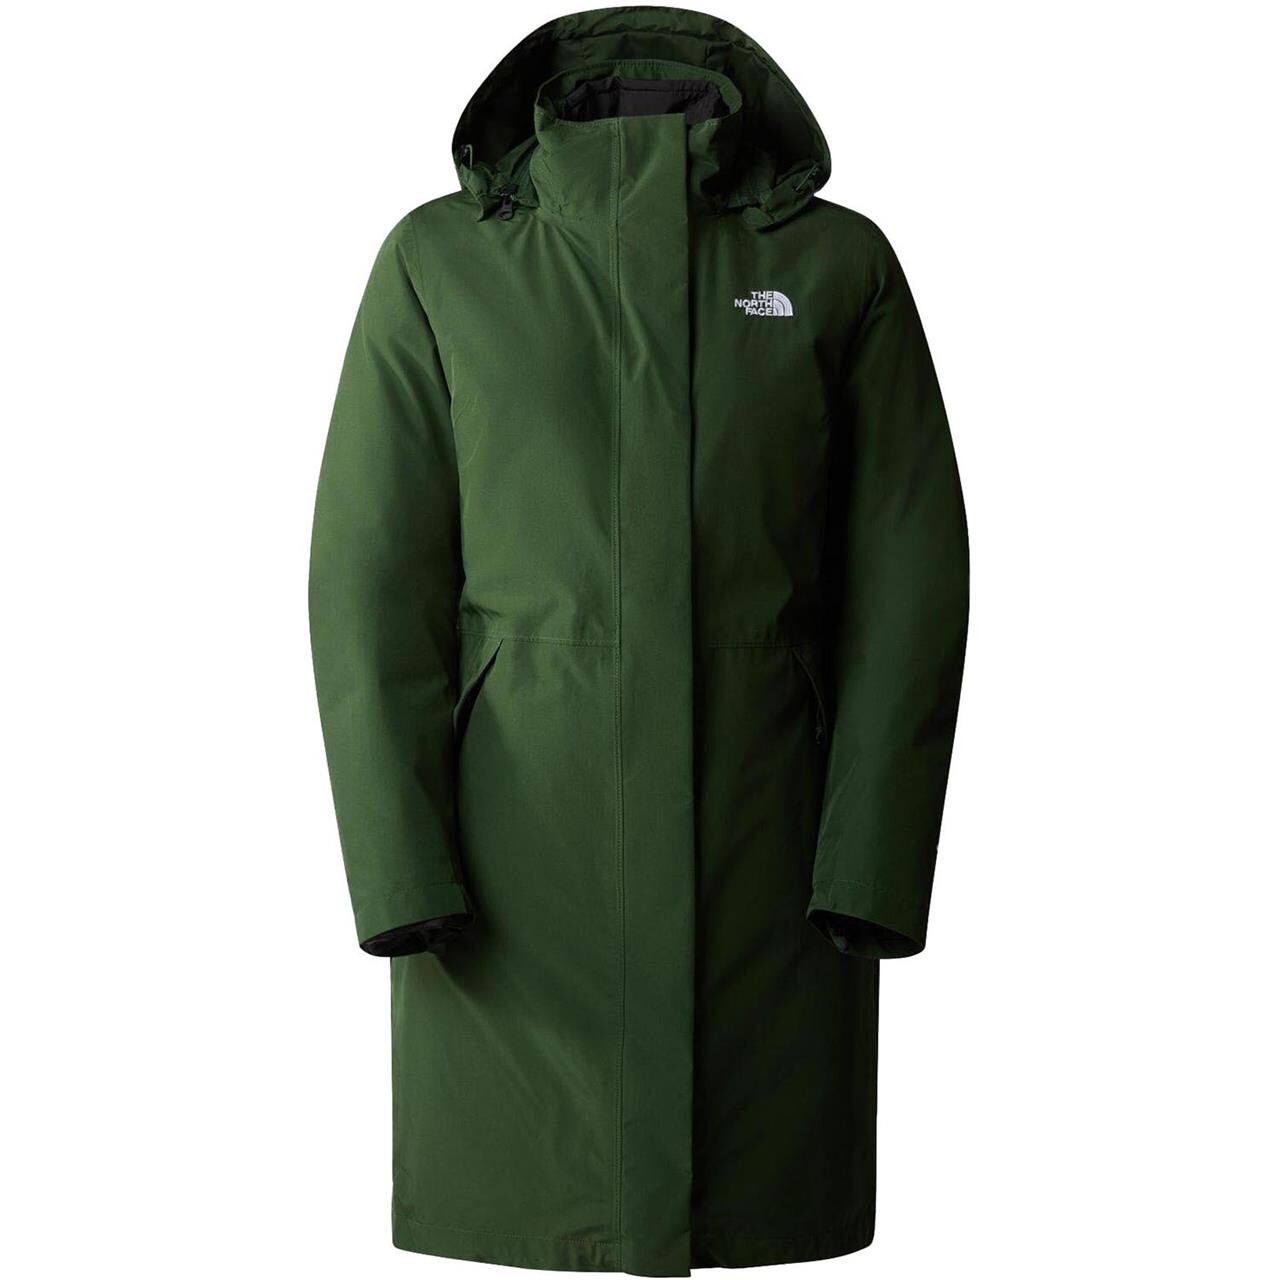 Se The North Face Womens Recycled Suzanne Triclimate Jacket (Grøn (PINE NEEDLE/PINE NEEDLE) Small) hos Friluftsland.dk